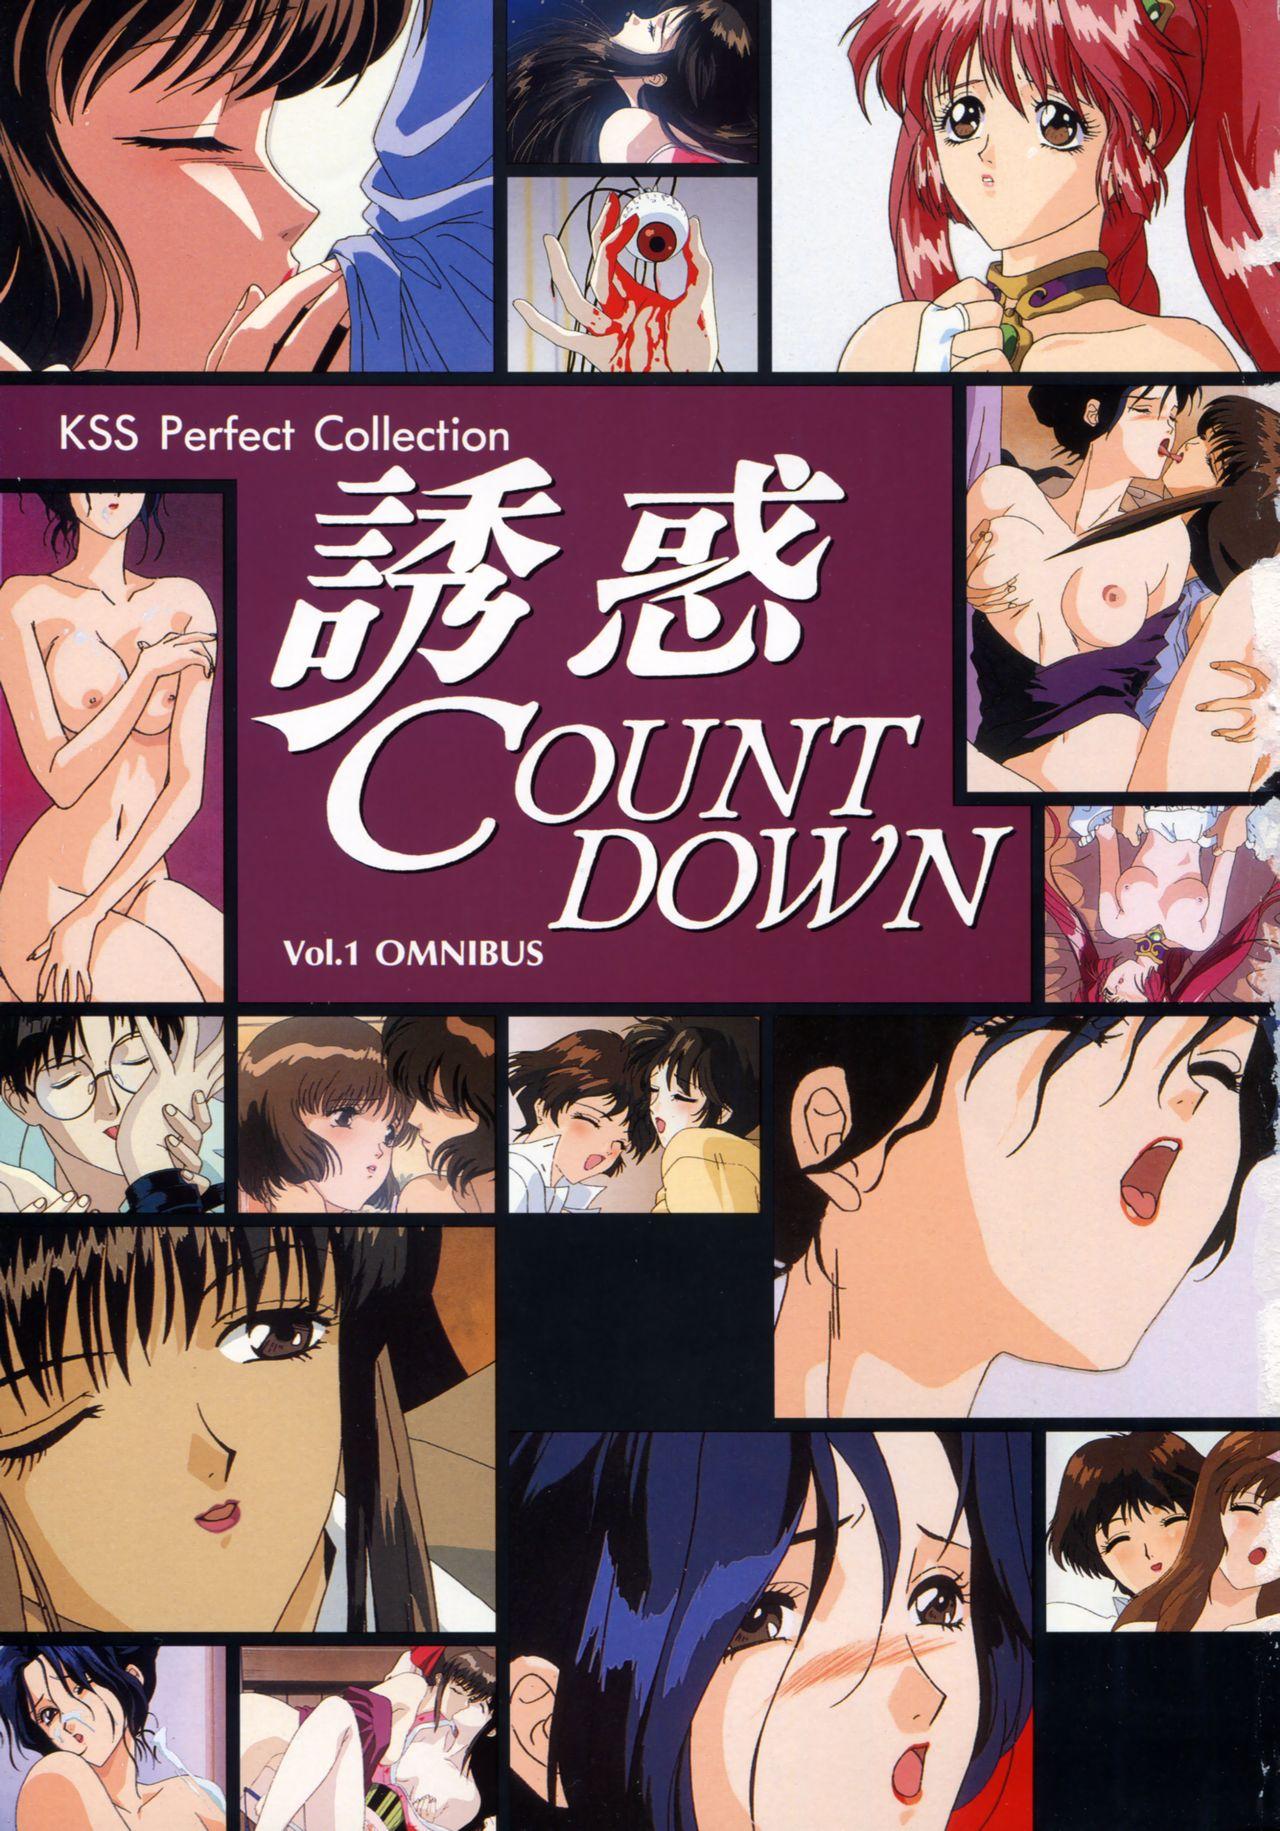 Yuuwaku Count Down Vol. 1 Omnibus Perfect Collection 5